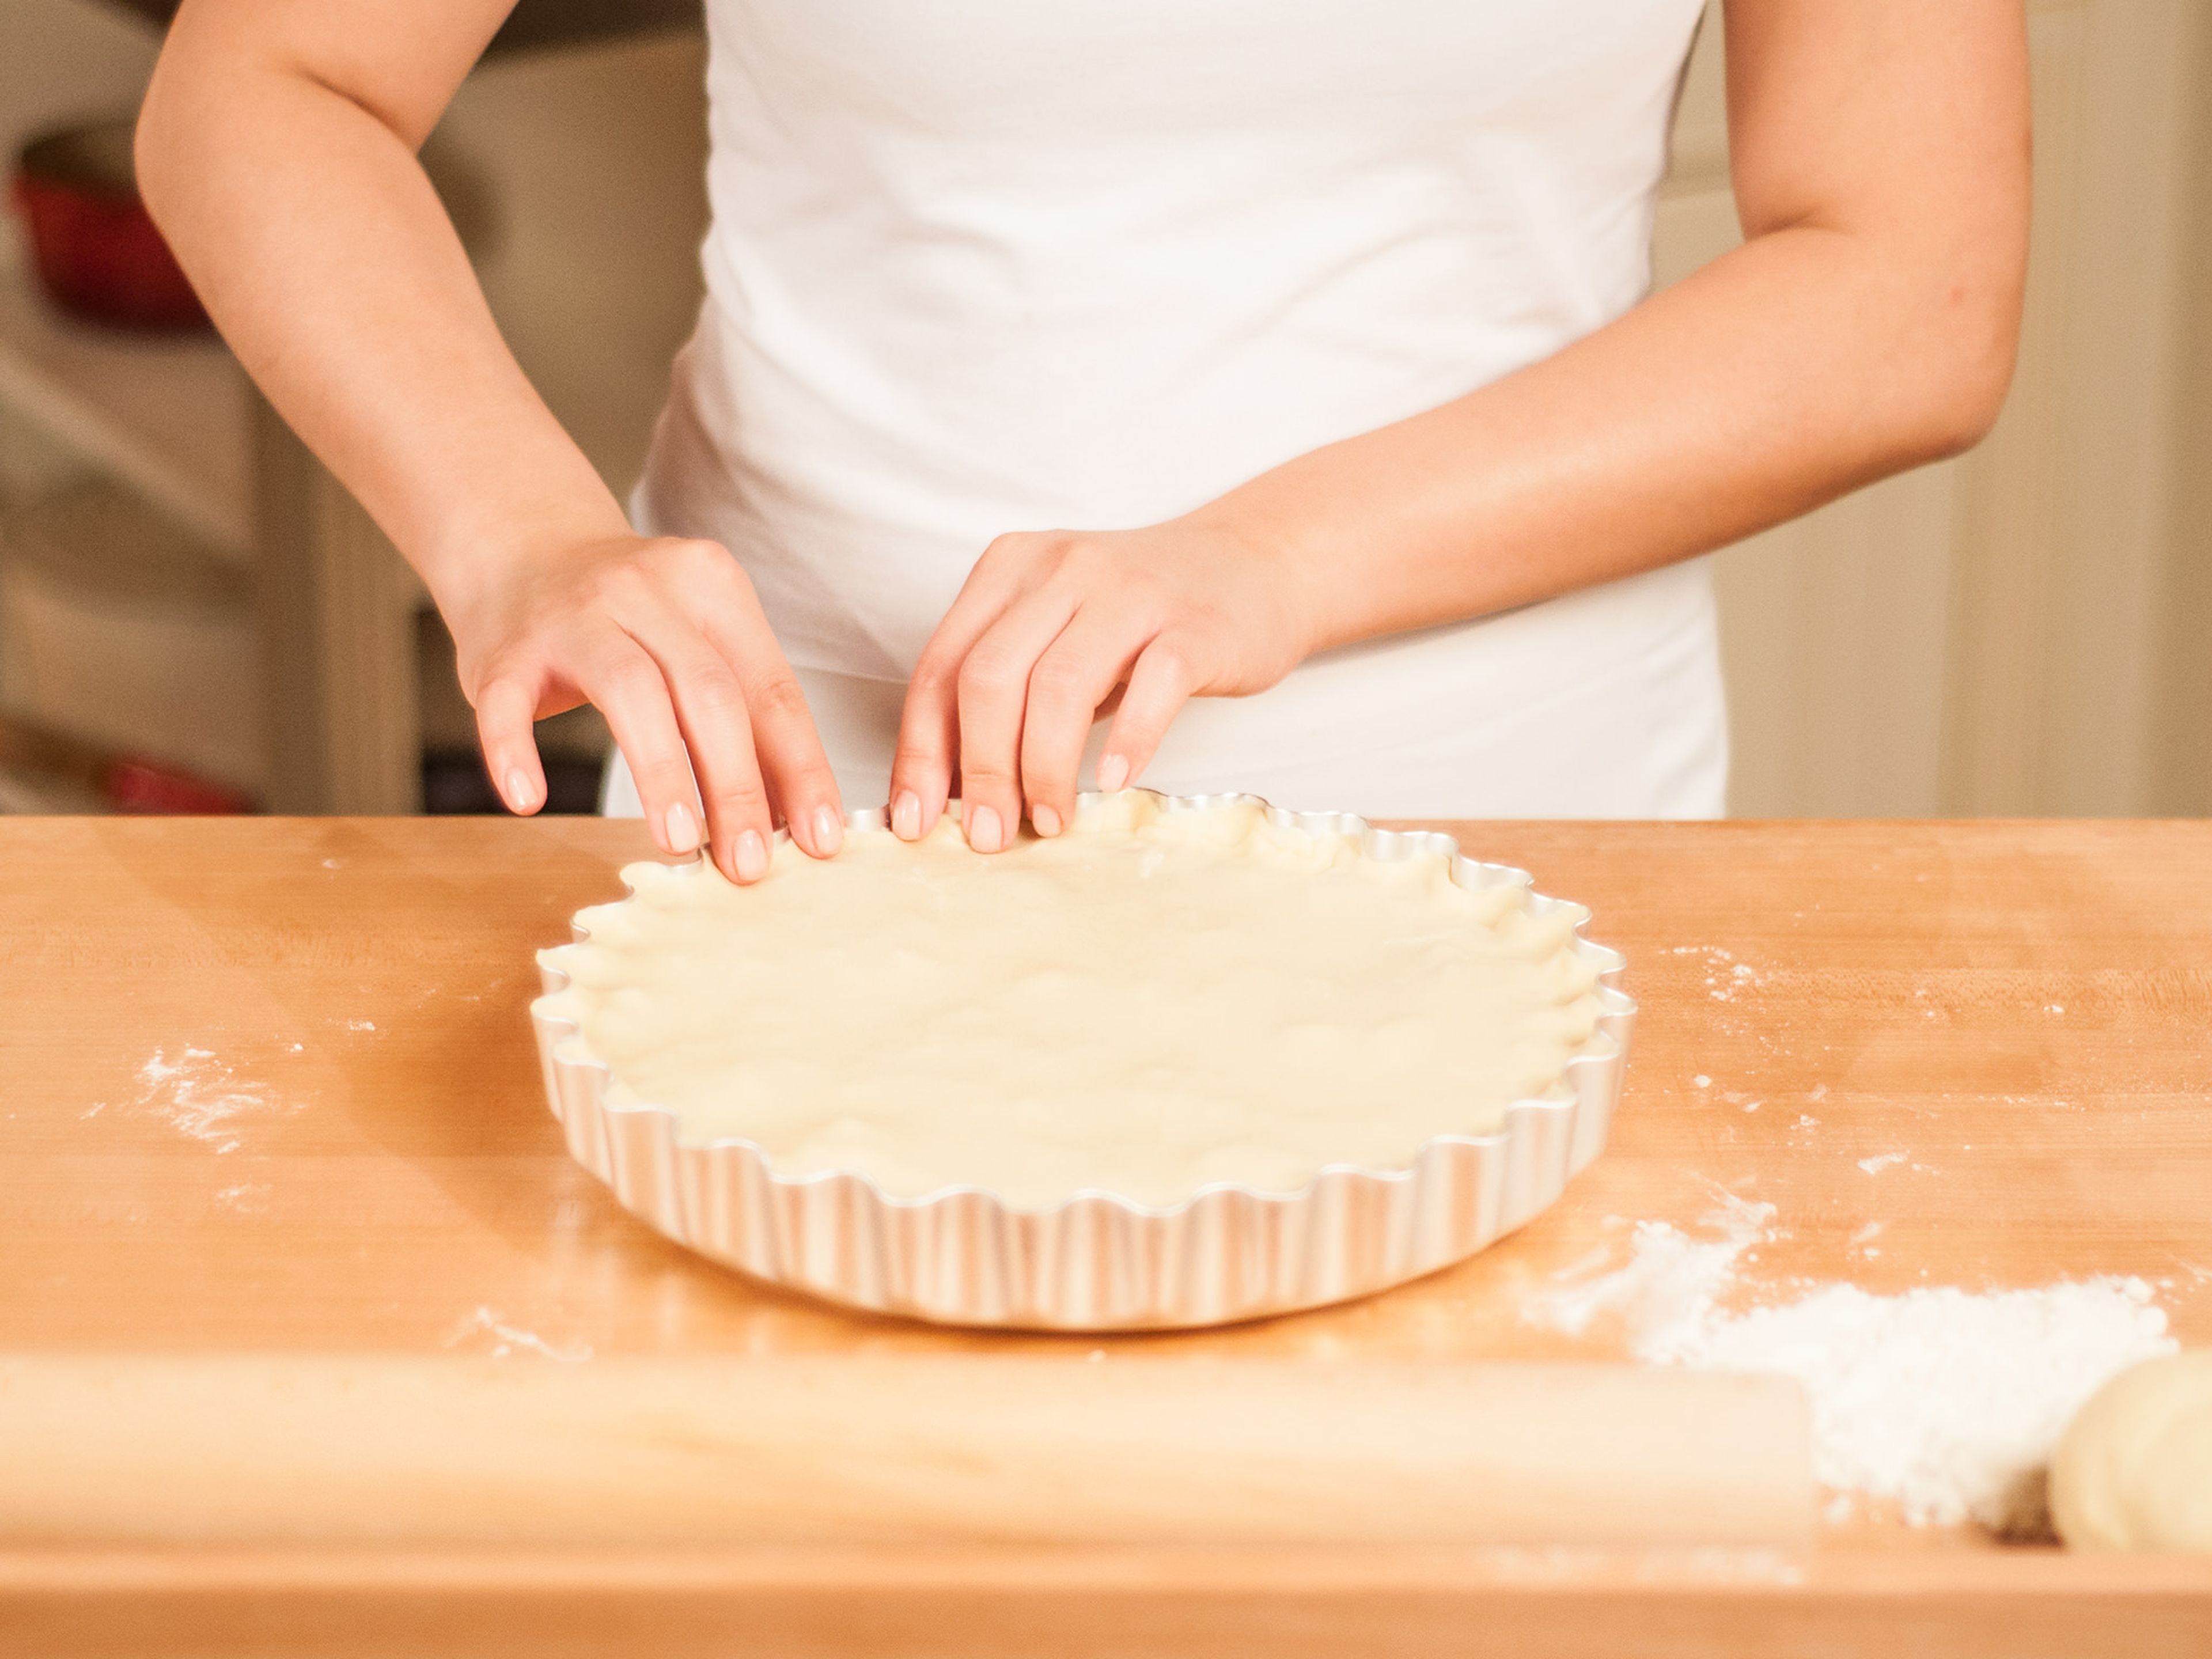 Cover the pie with the prepared top crust. Trim the excess leaving an overhang of approx. 1cm. Crimp overhang to seal the pie.